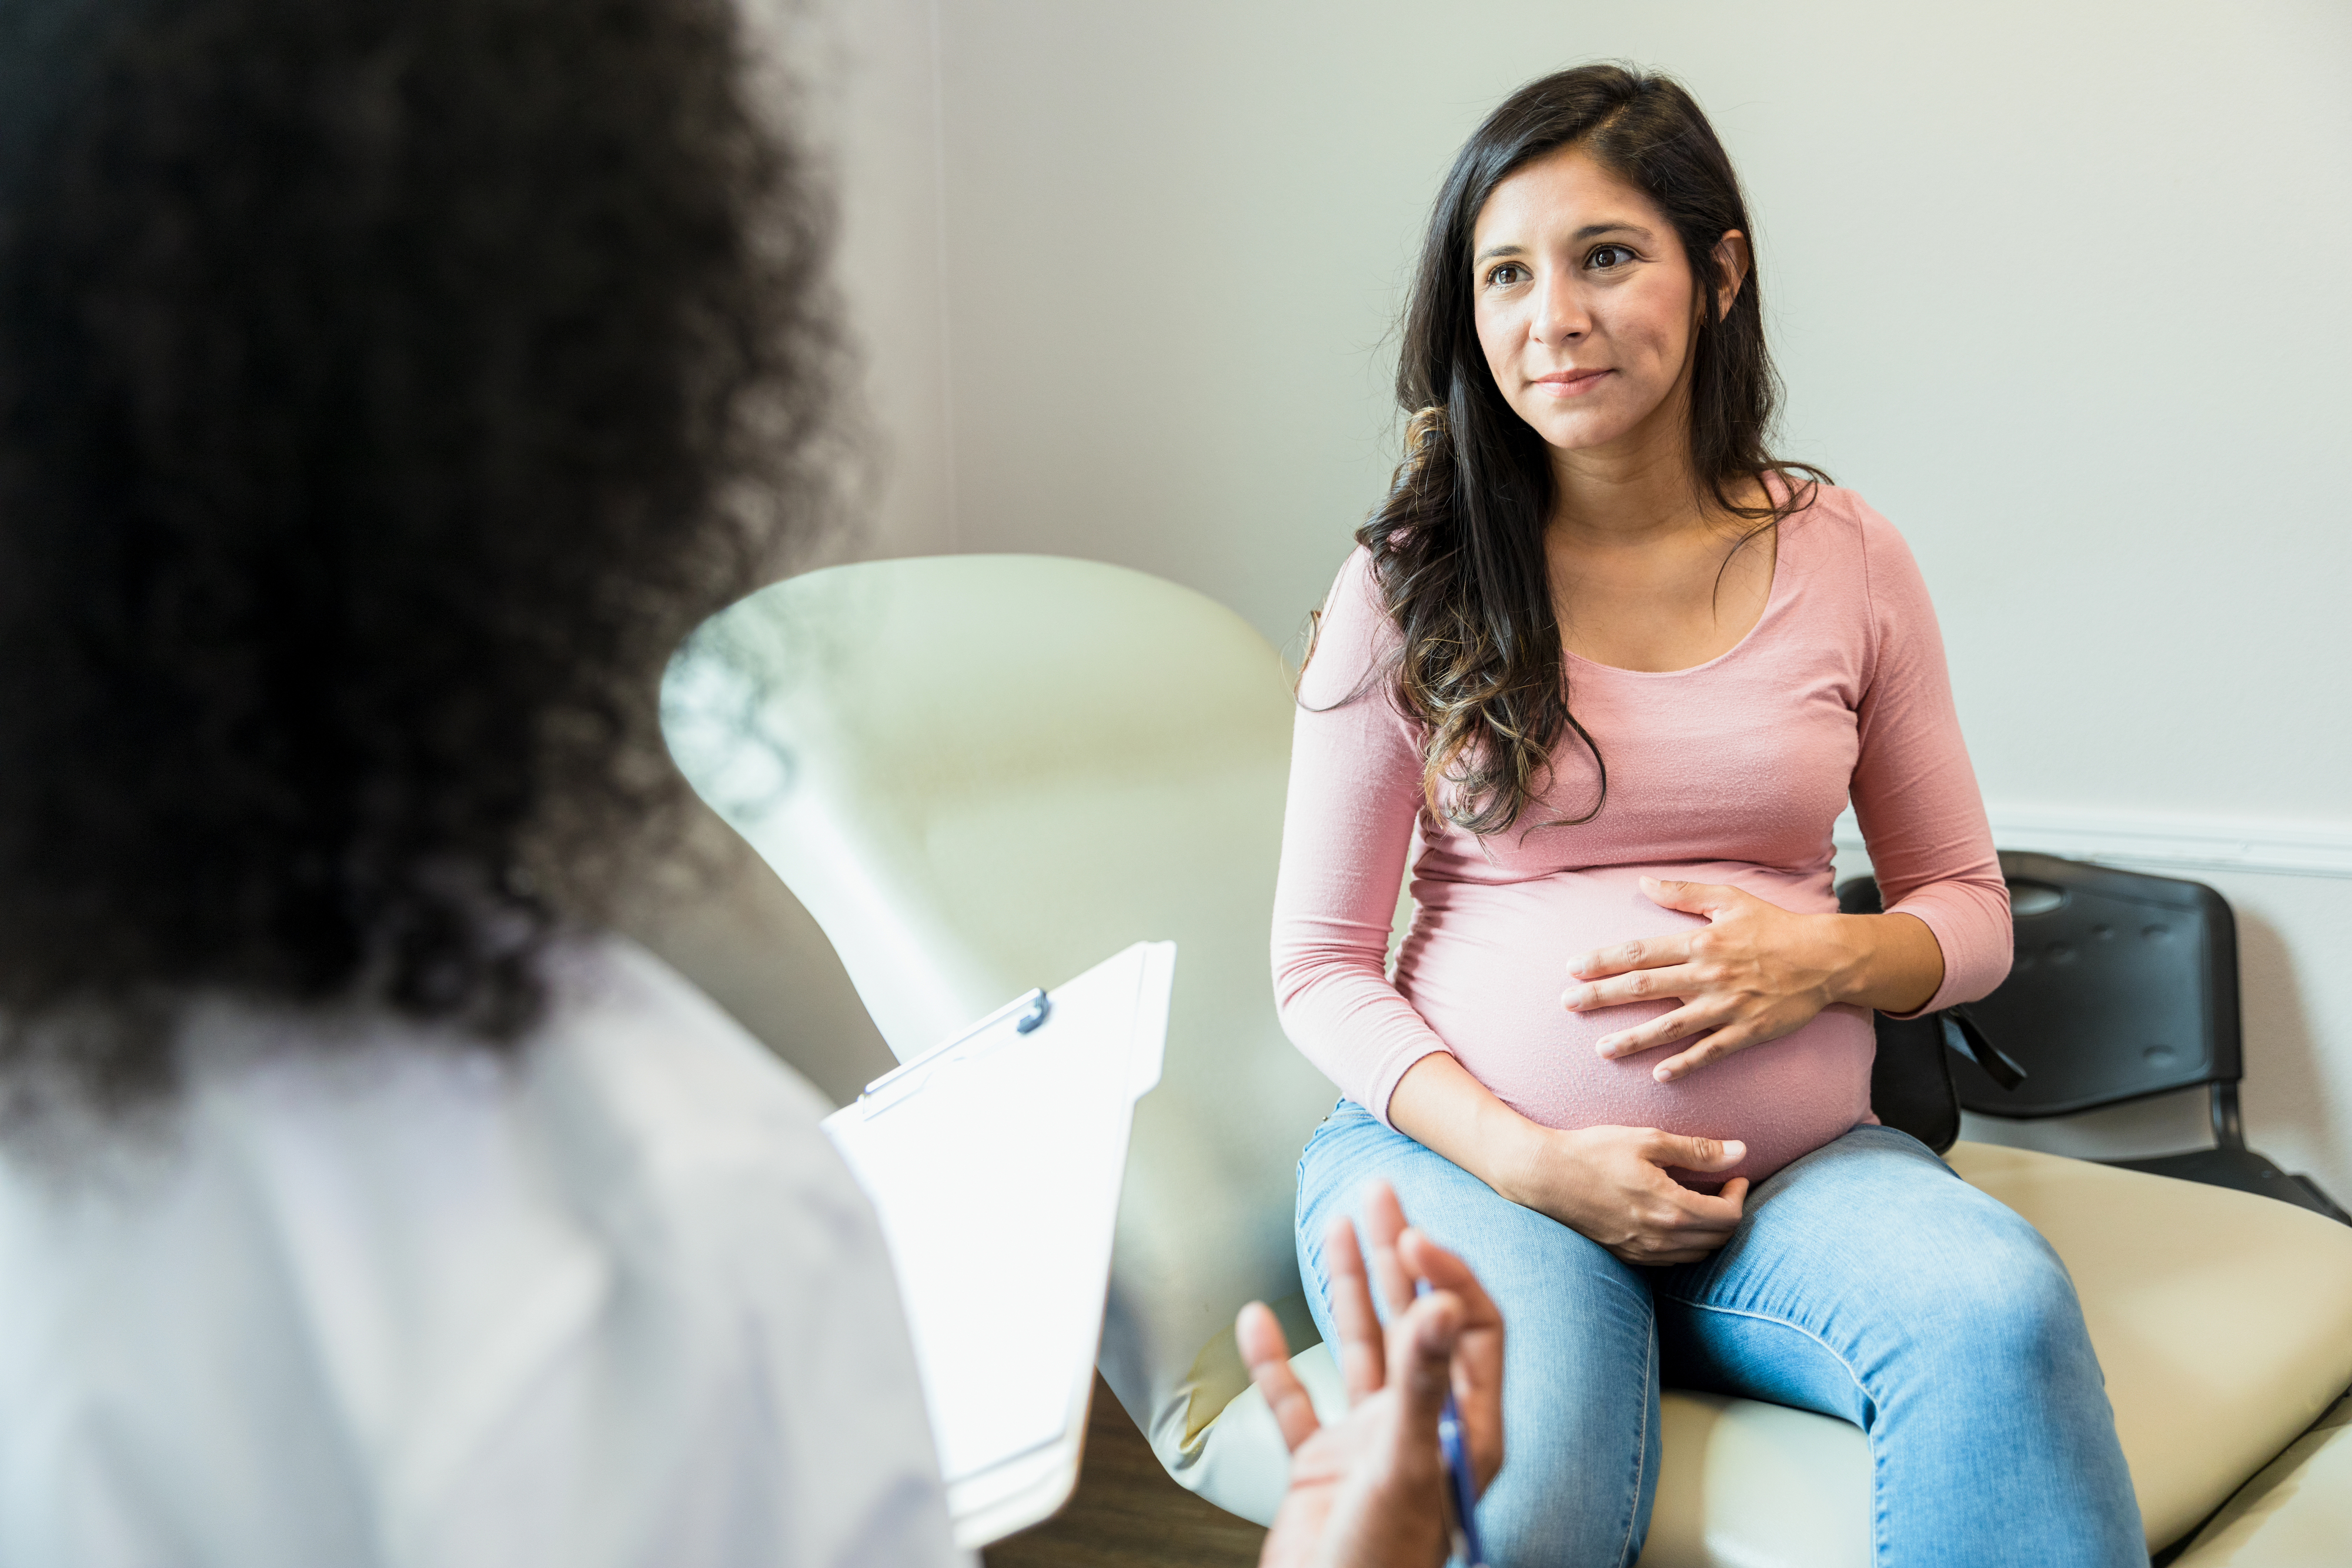 Pregnant woman with long dark hair sitting in a clinic room talking to her doctor.